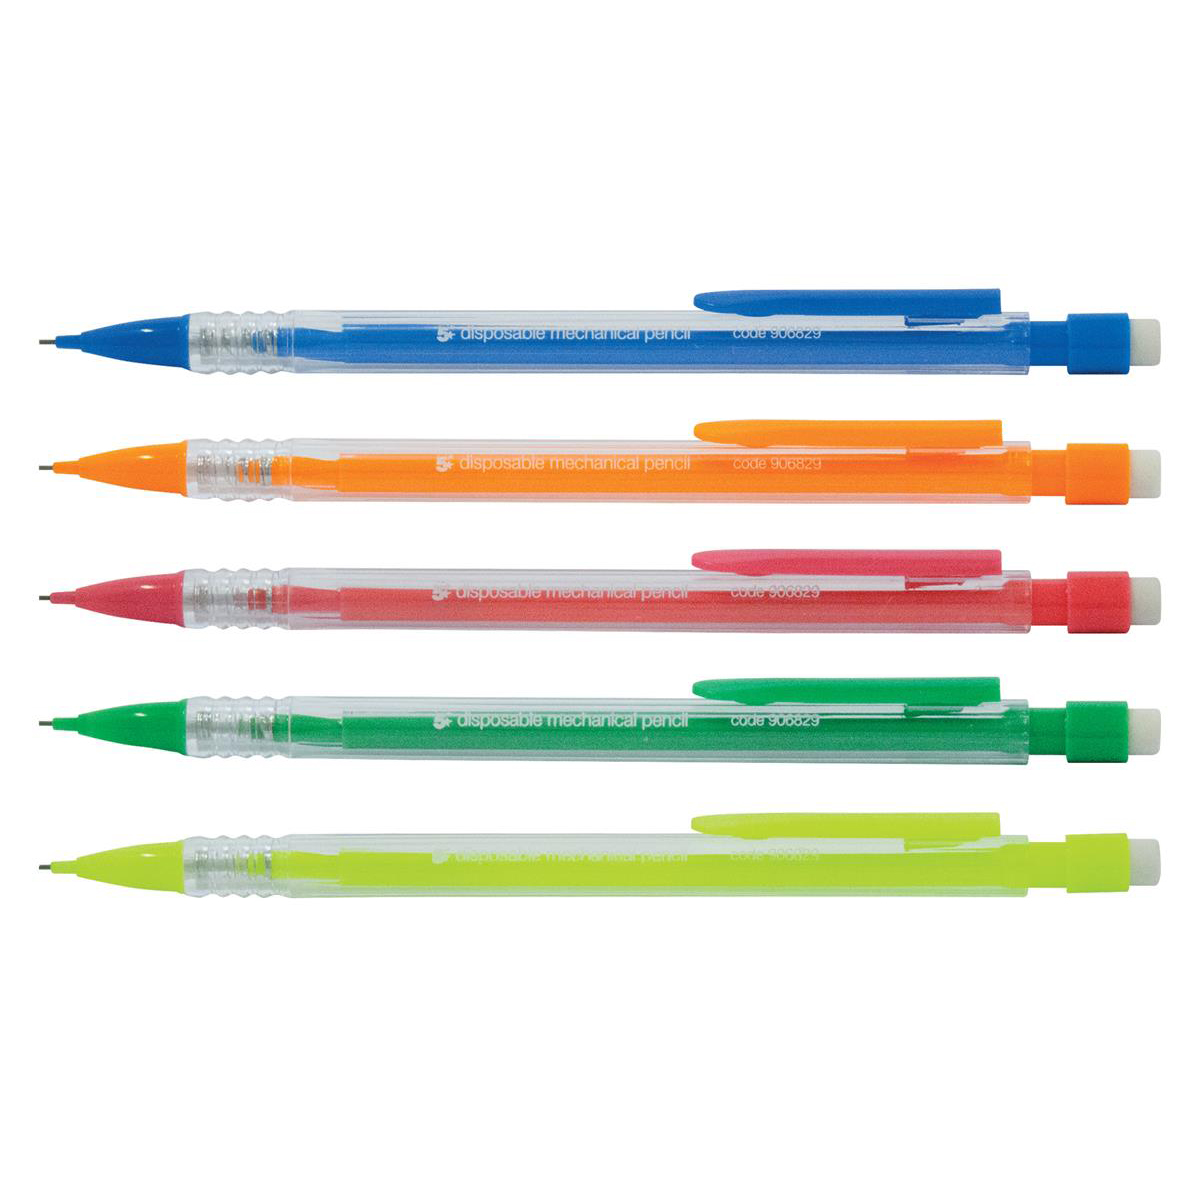 5 Star Office Disposable Mechanical Pencil Retractable with 3 x 0.7mm Lead Assorted Barrels